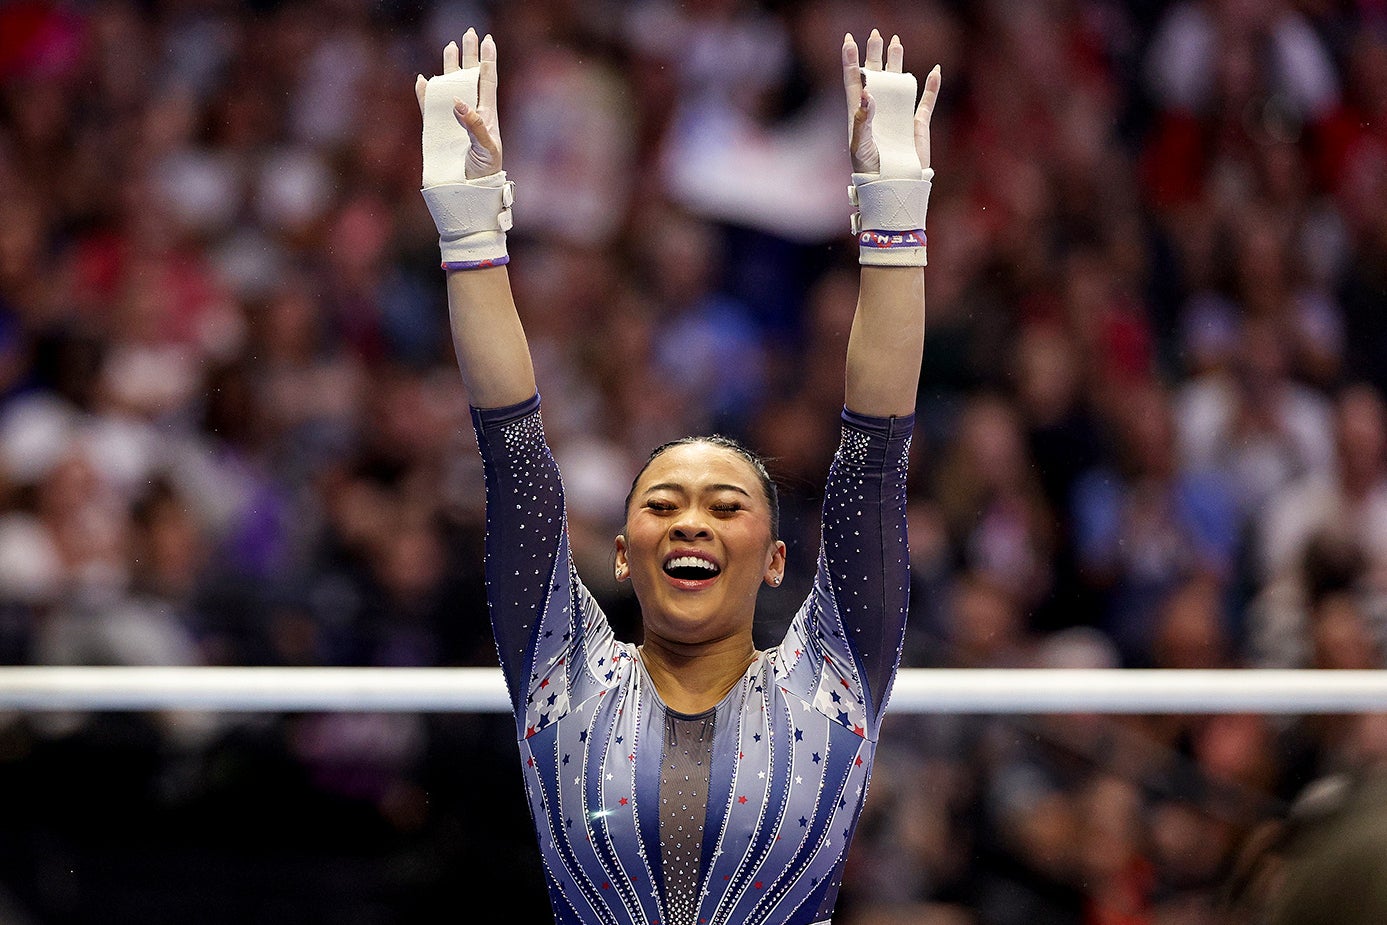 Lee beams with her eyes closed and arms outstretched into the air with the uneven bars and the crowd behind her